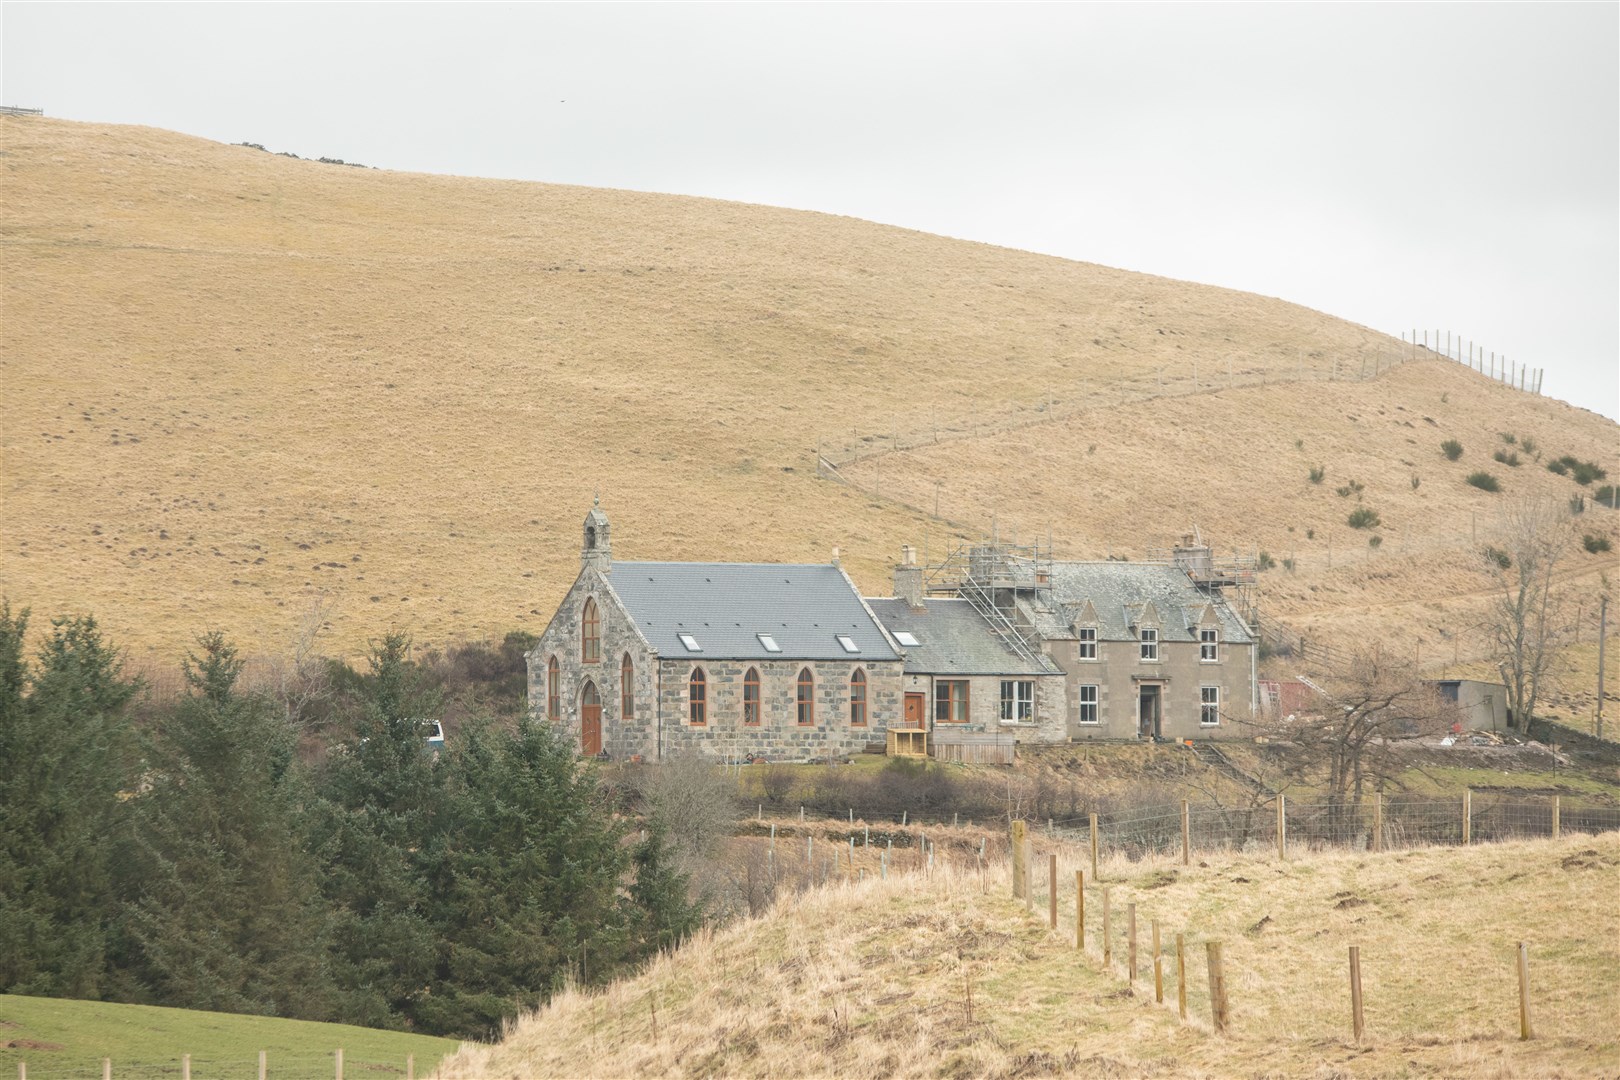 Mr Smith's home nestled in the heart of the Cabrach. Picture: Daniel Forsyth